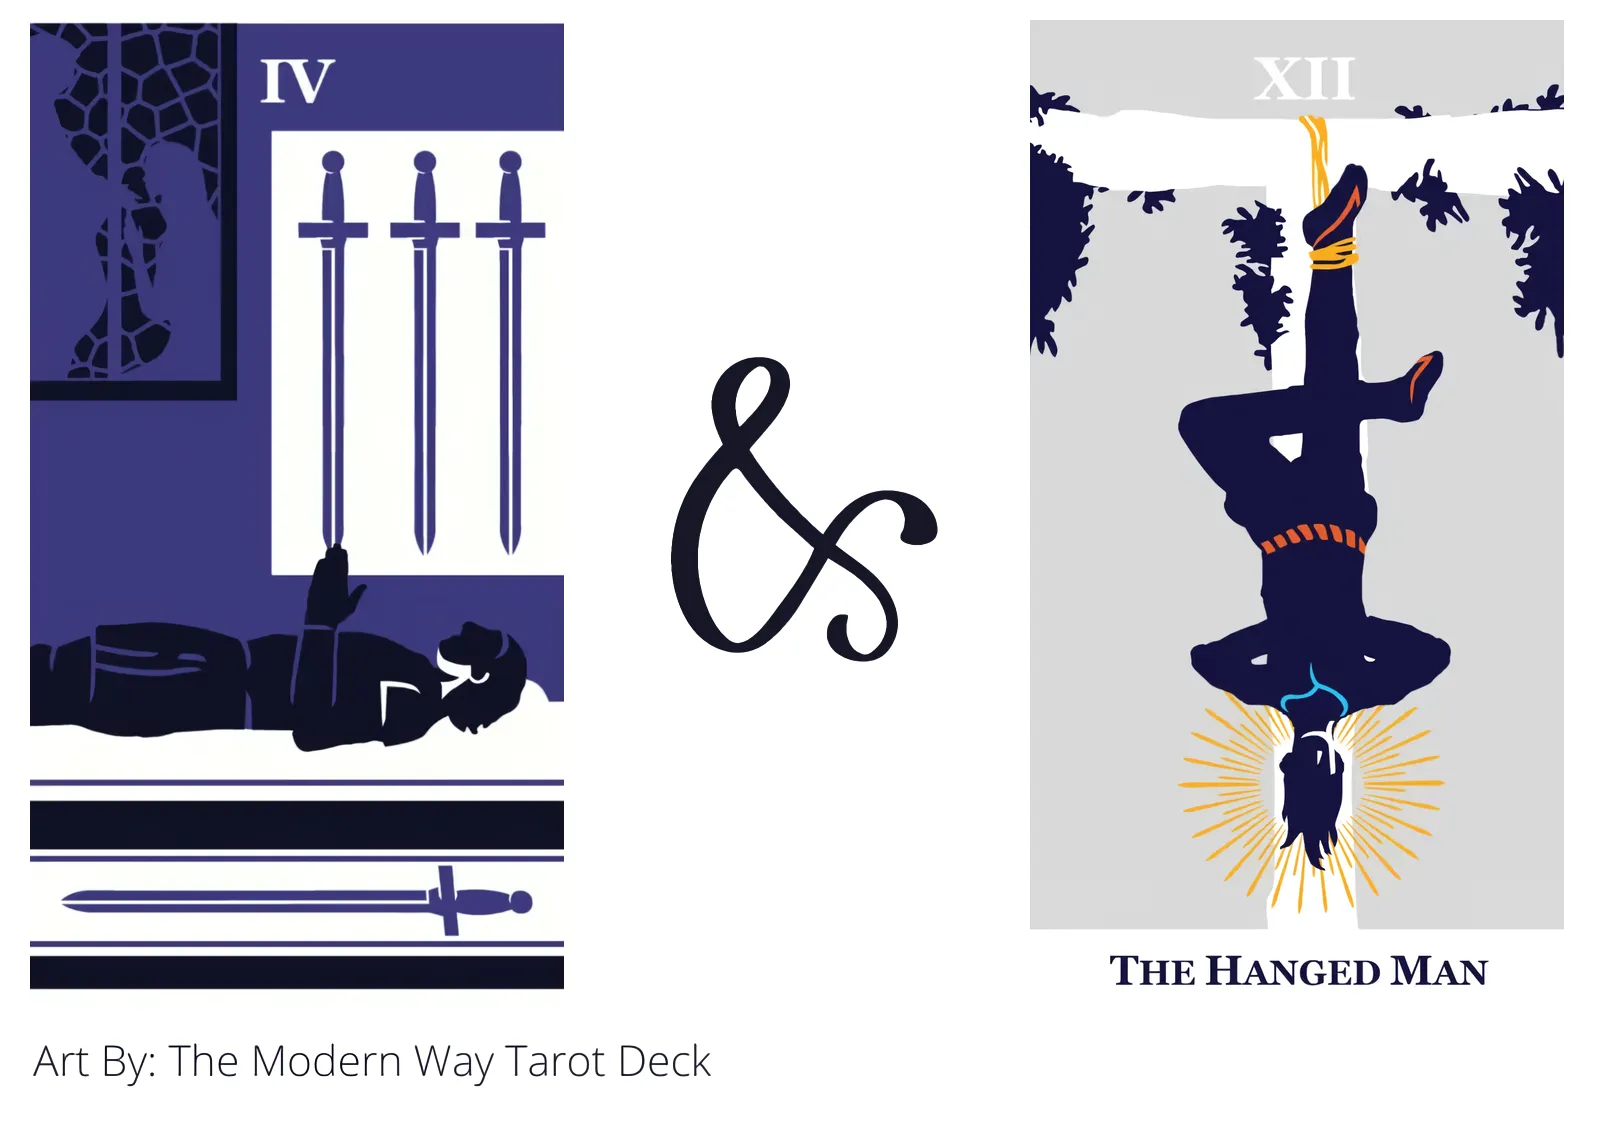 four of swords and the hanged man tarot cards together